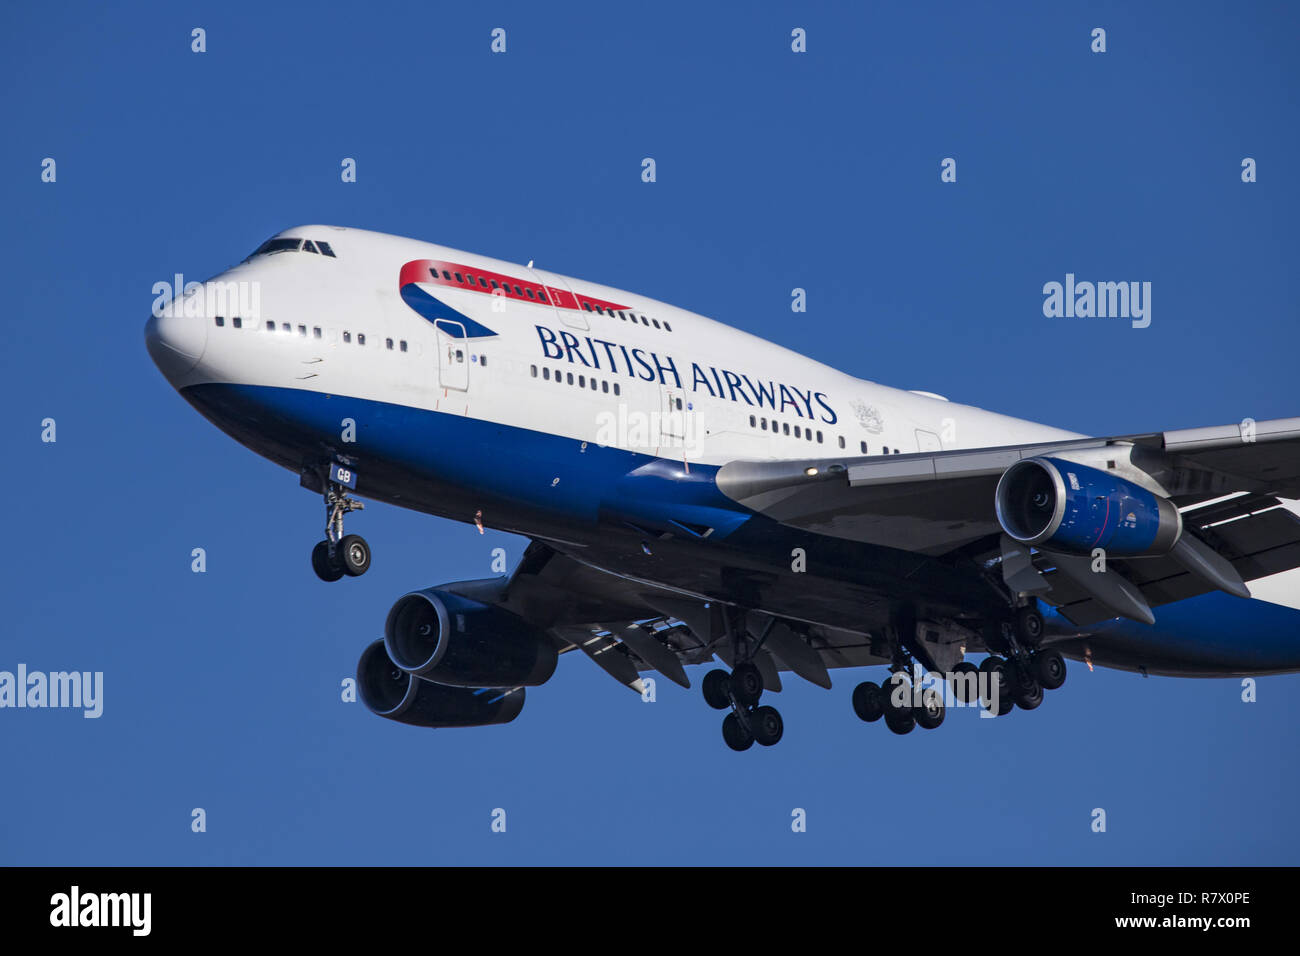 United Kingdom. 30th Nov, 2018. British Airways Boeing 747 Jumbo Jet seen  landing at the London Heathrow Airport LHR/EGLL in England.The aircraft is  a Boeing 747-400 with registration G-BYGB, it is equipped